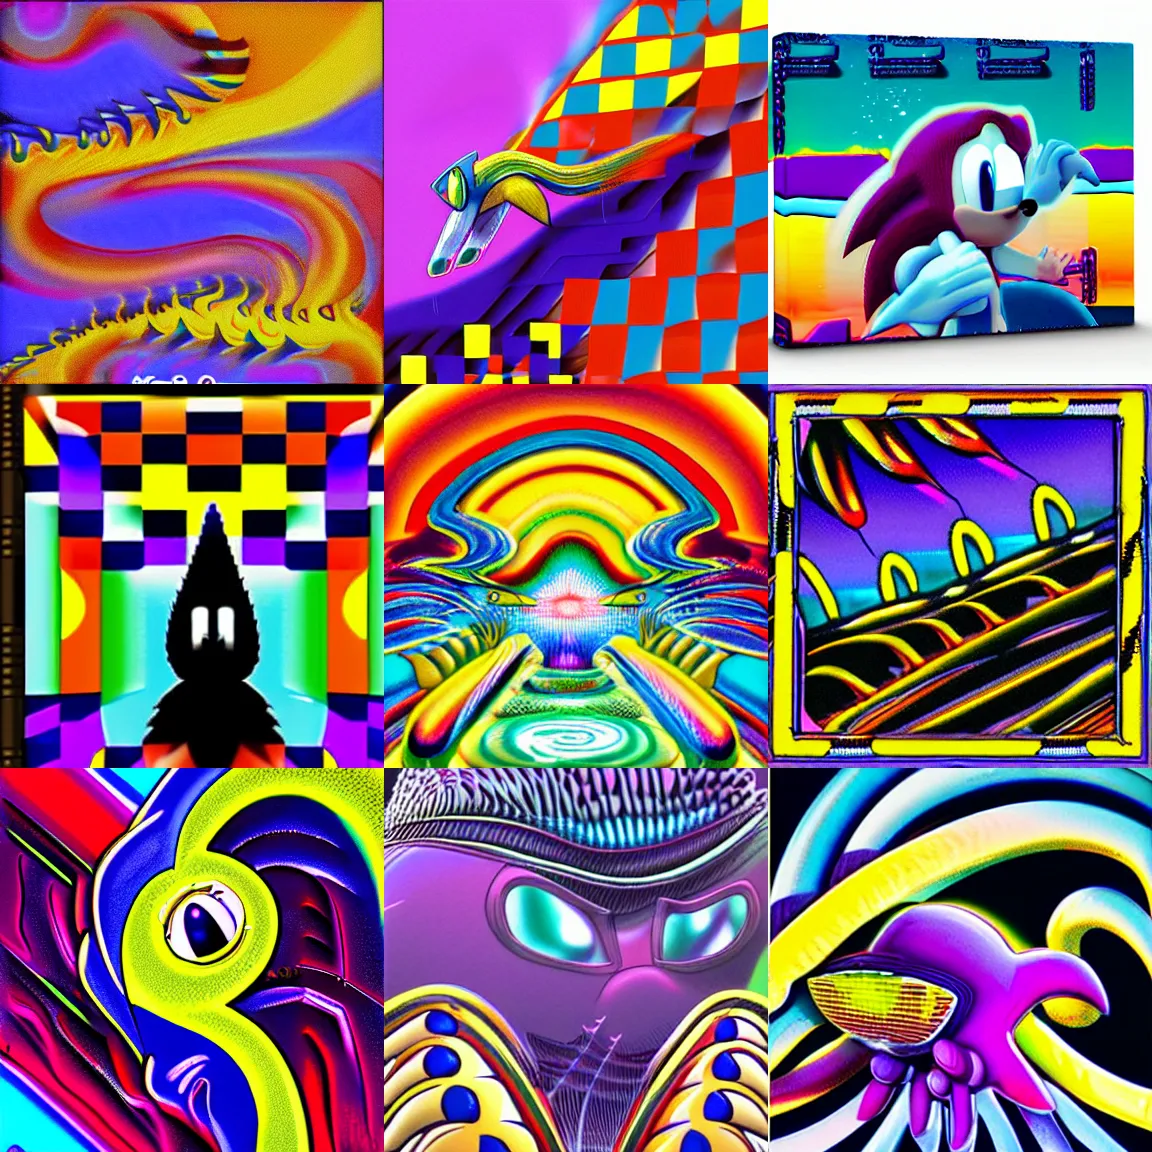 Prompt: surreal, sharp, detailed professional, high quality portrait sonic airbrush art mgmt album cover portrait of a liquid dissolving lsd dmt sonic the hedgehog surfing through cyberspace, purple checkerboard background, 1 9 9 0 s 1 9 9 2 sega genesis video game album cover